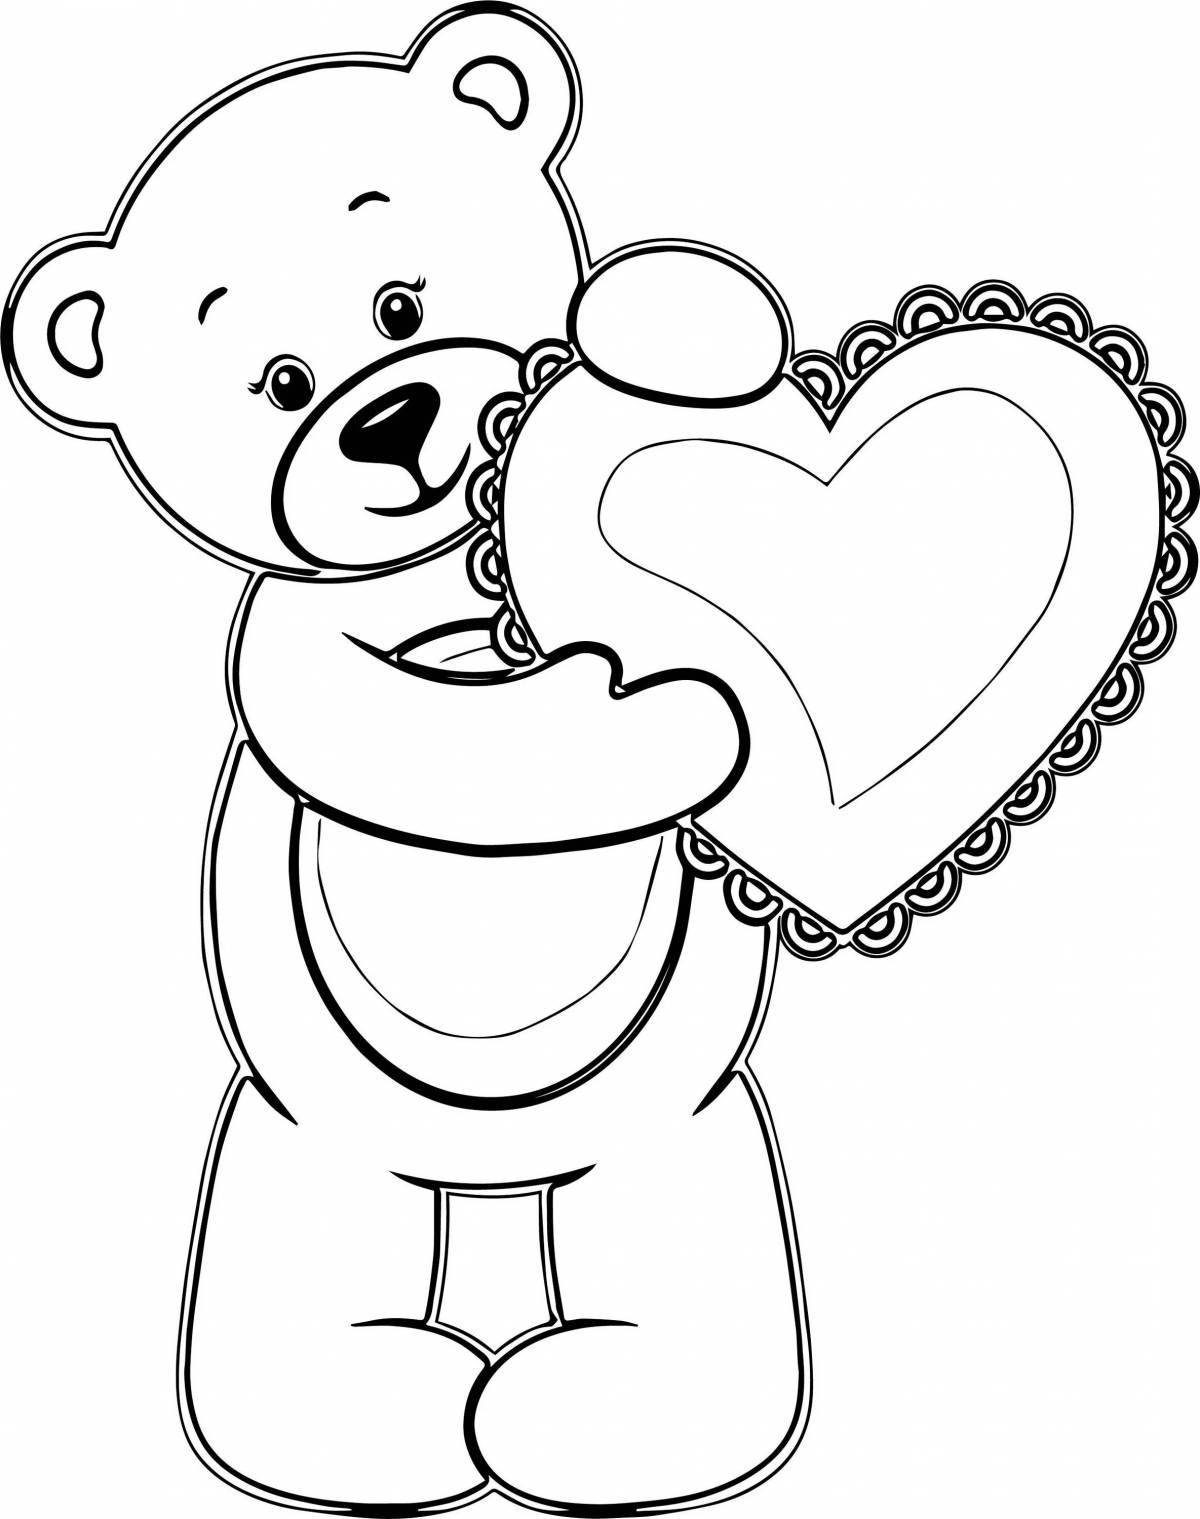 Entertaining teddy bear with heart coloring book